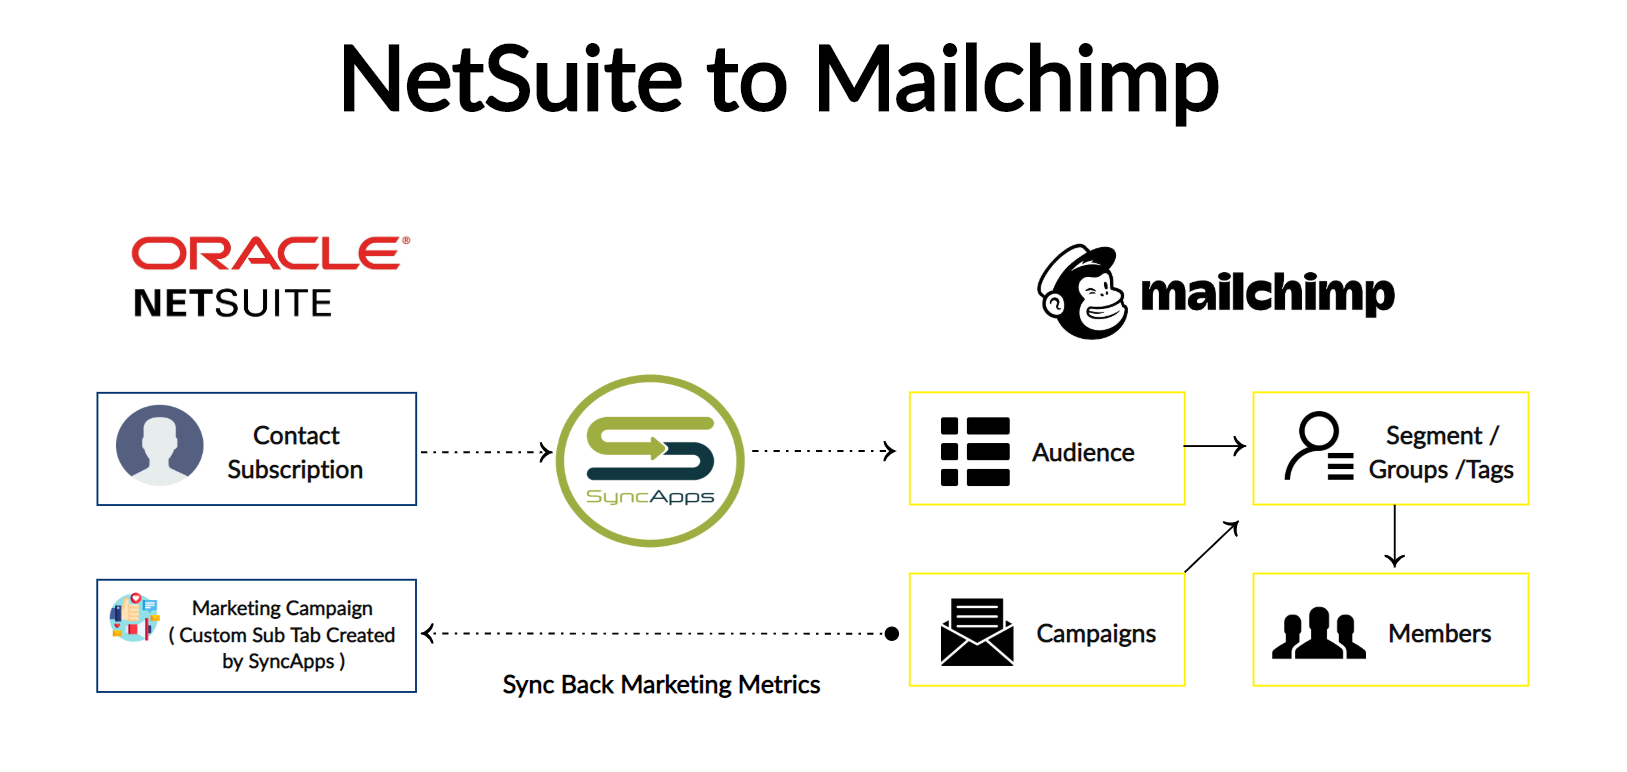 NetSuite for Mailchimp